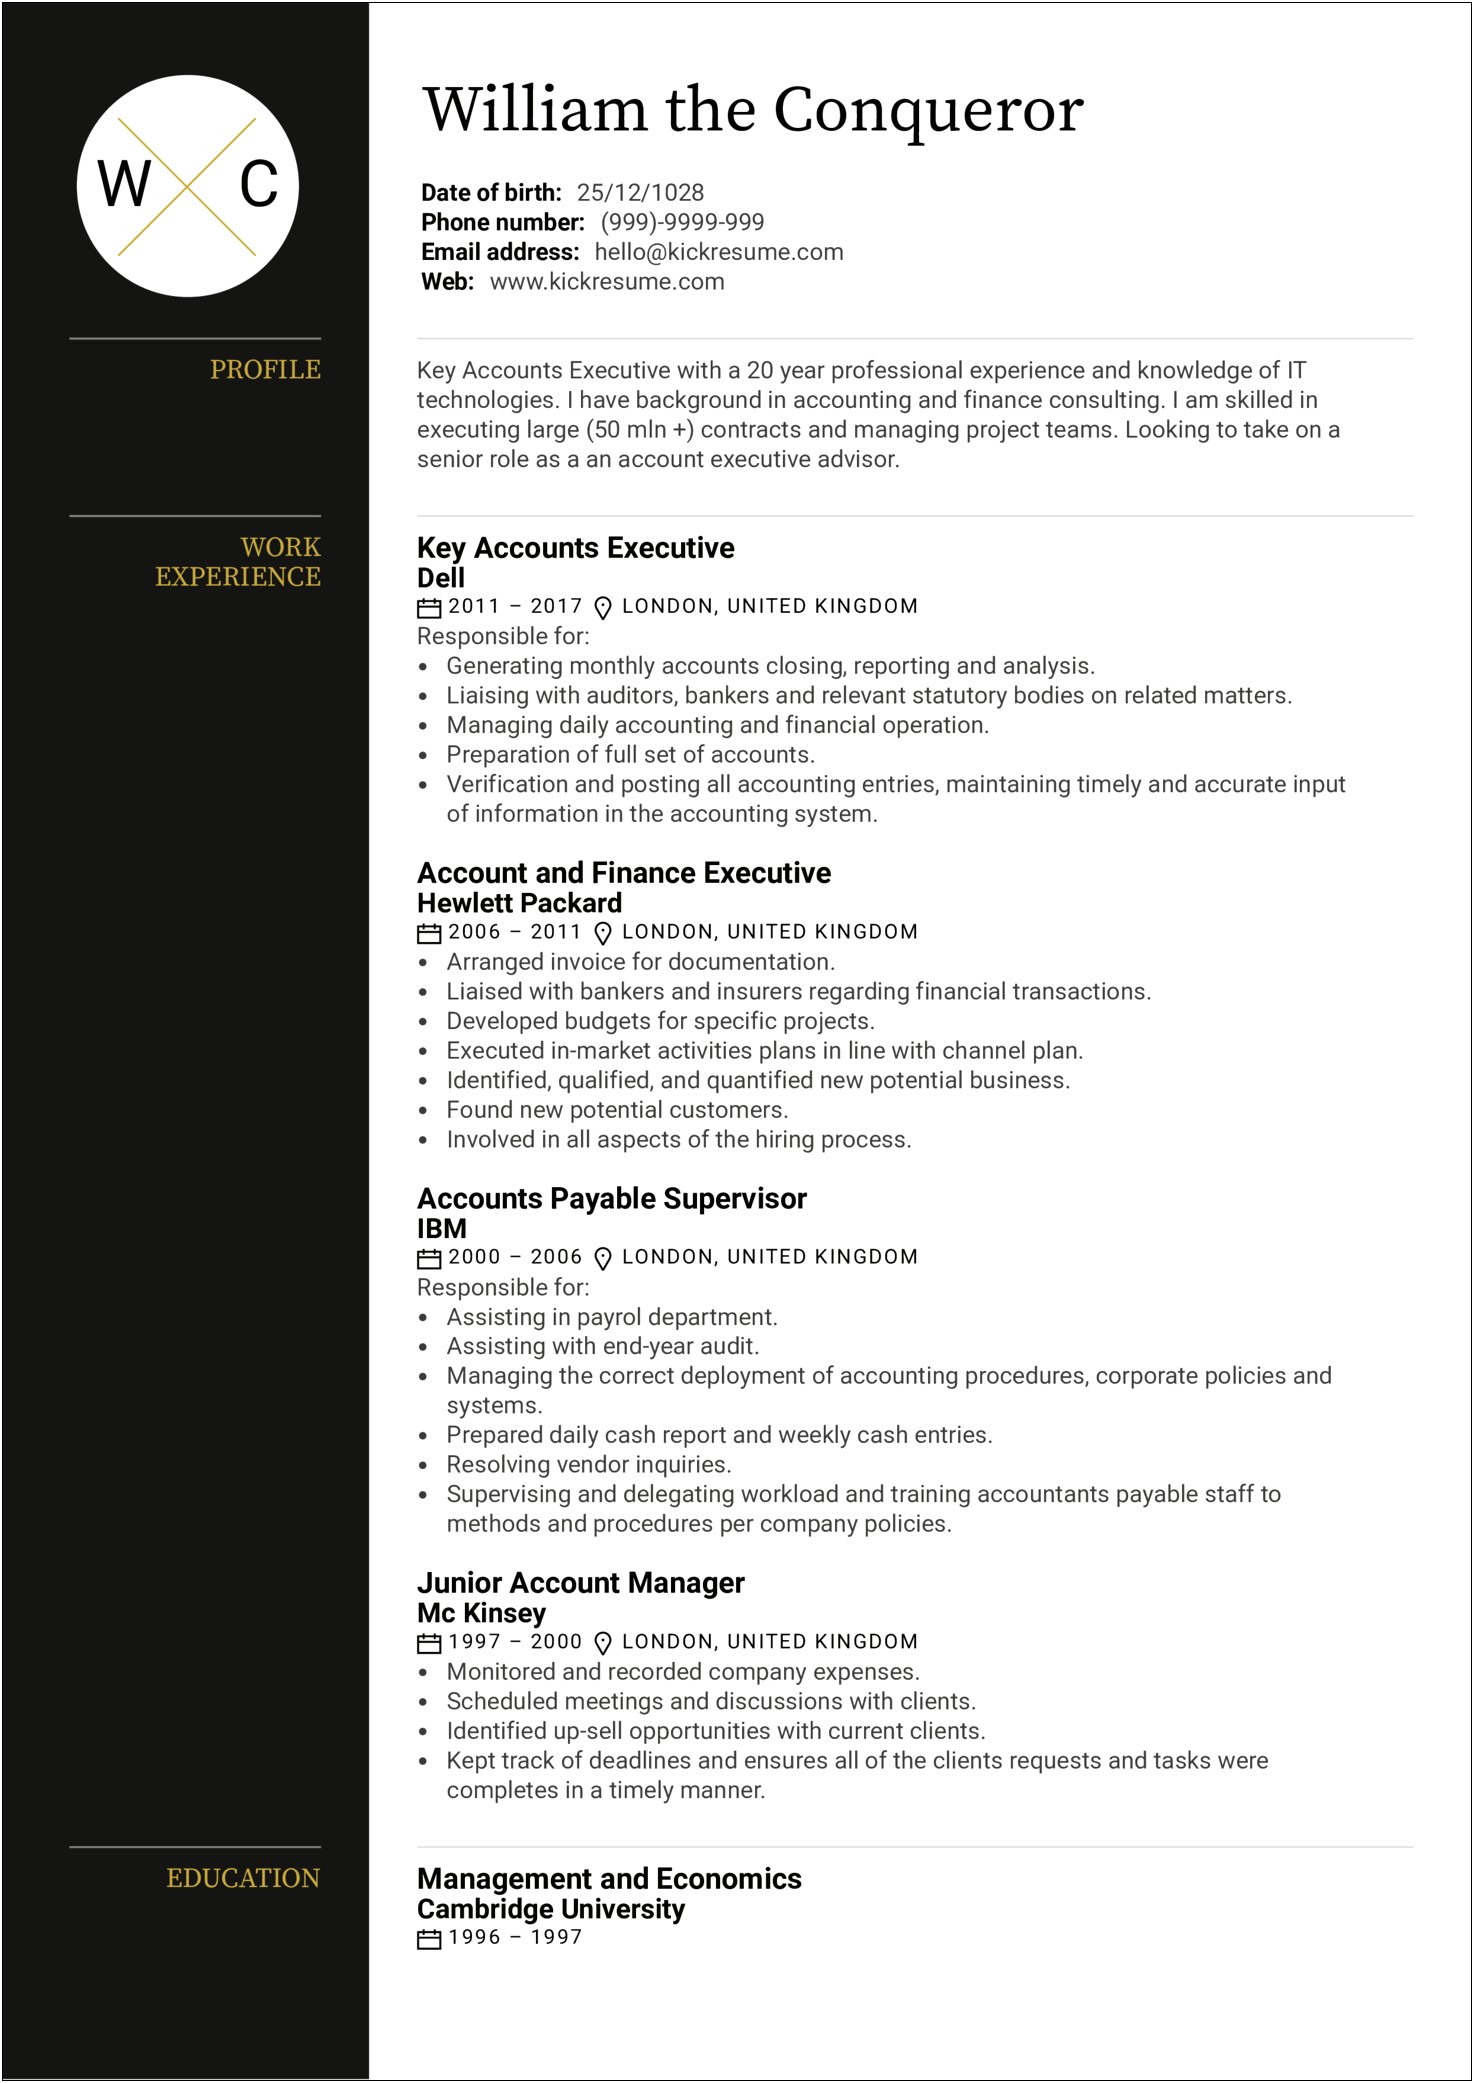 Resume Wording For Up Selling Account Manager